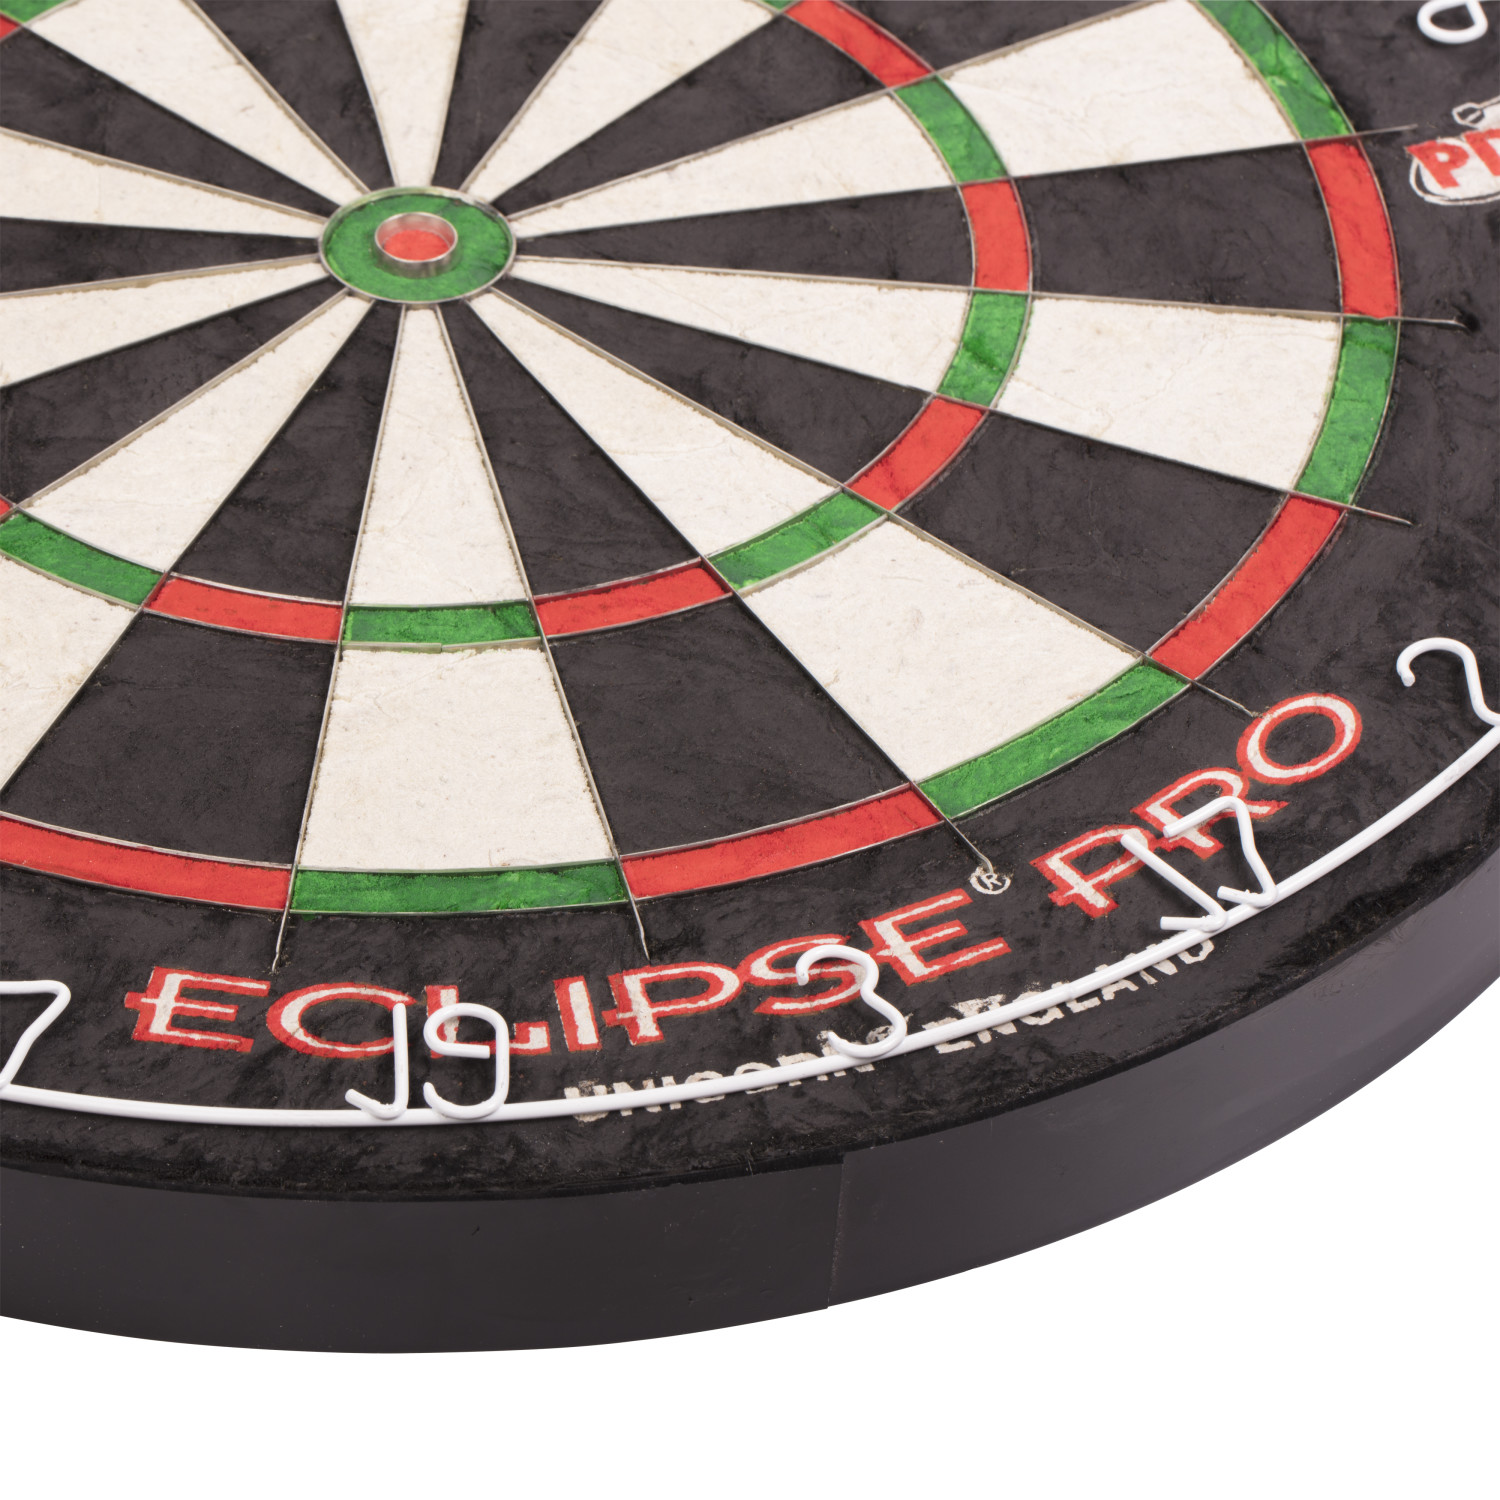 Unicorn Eclipse Pro Dart Board with Ultra slim Segmentation ? 30% Thinner Than Conventional Boards - image 3 of 9